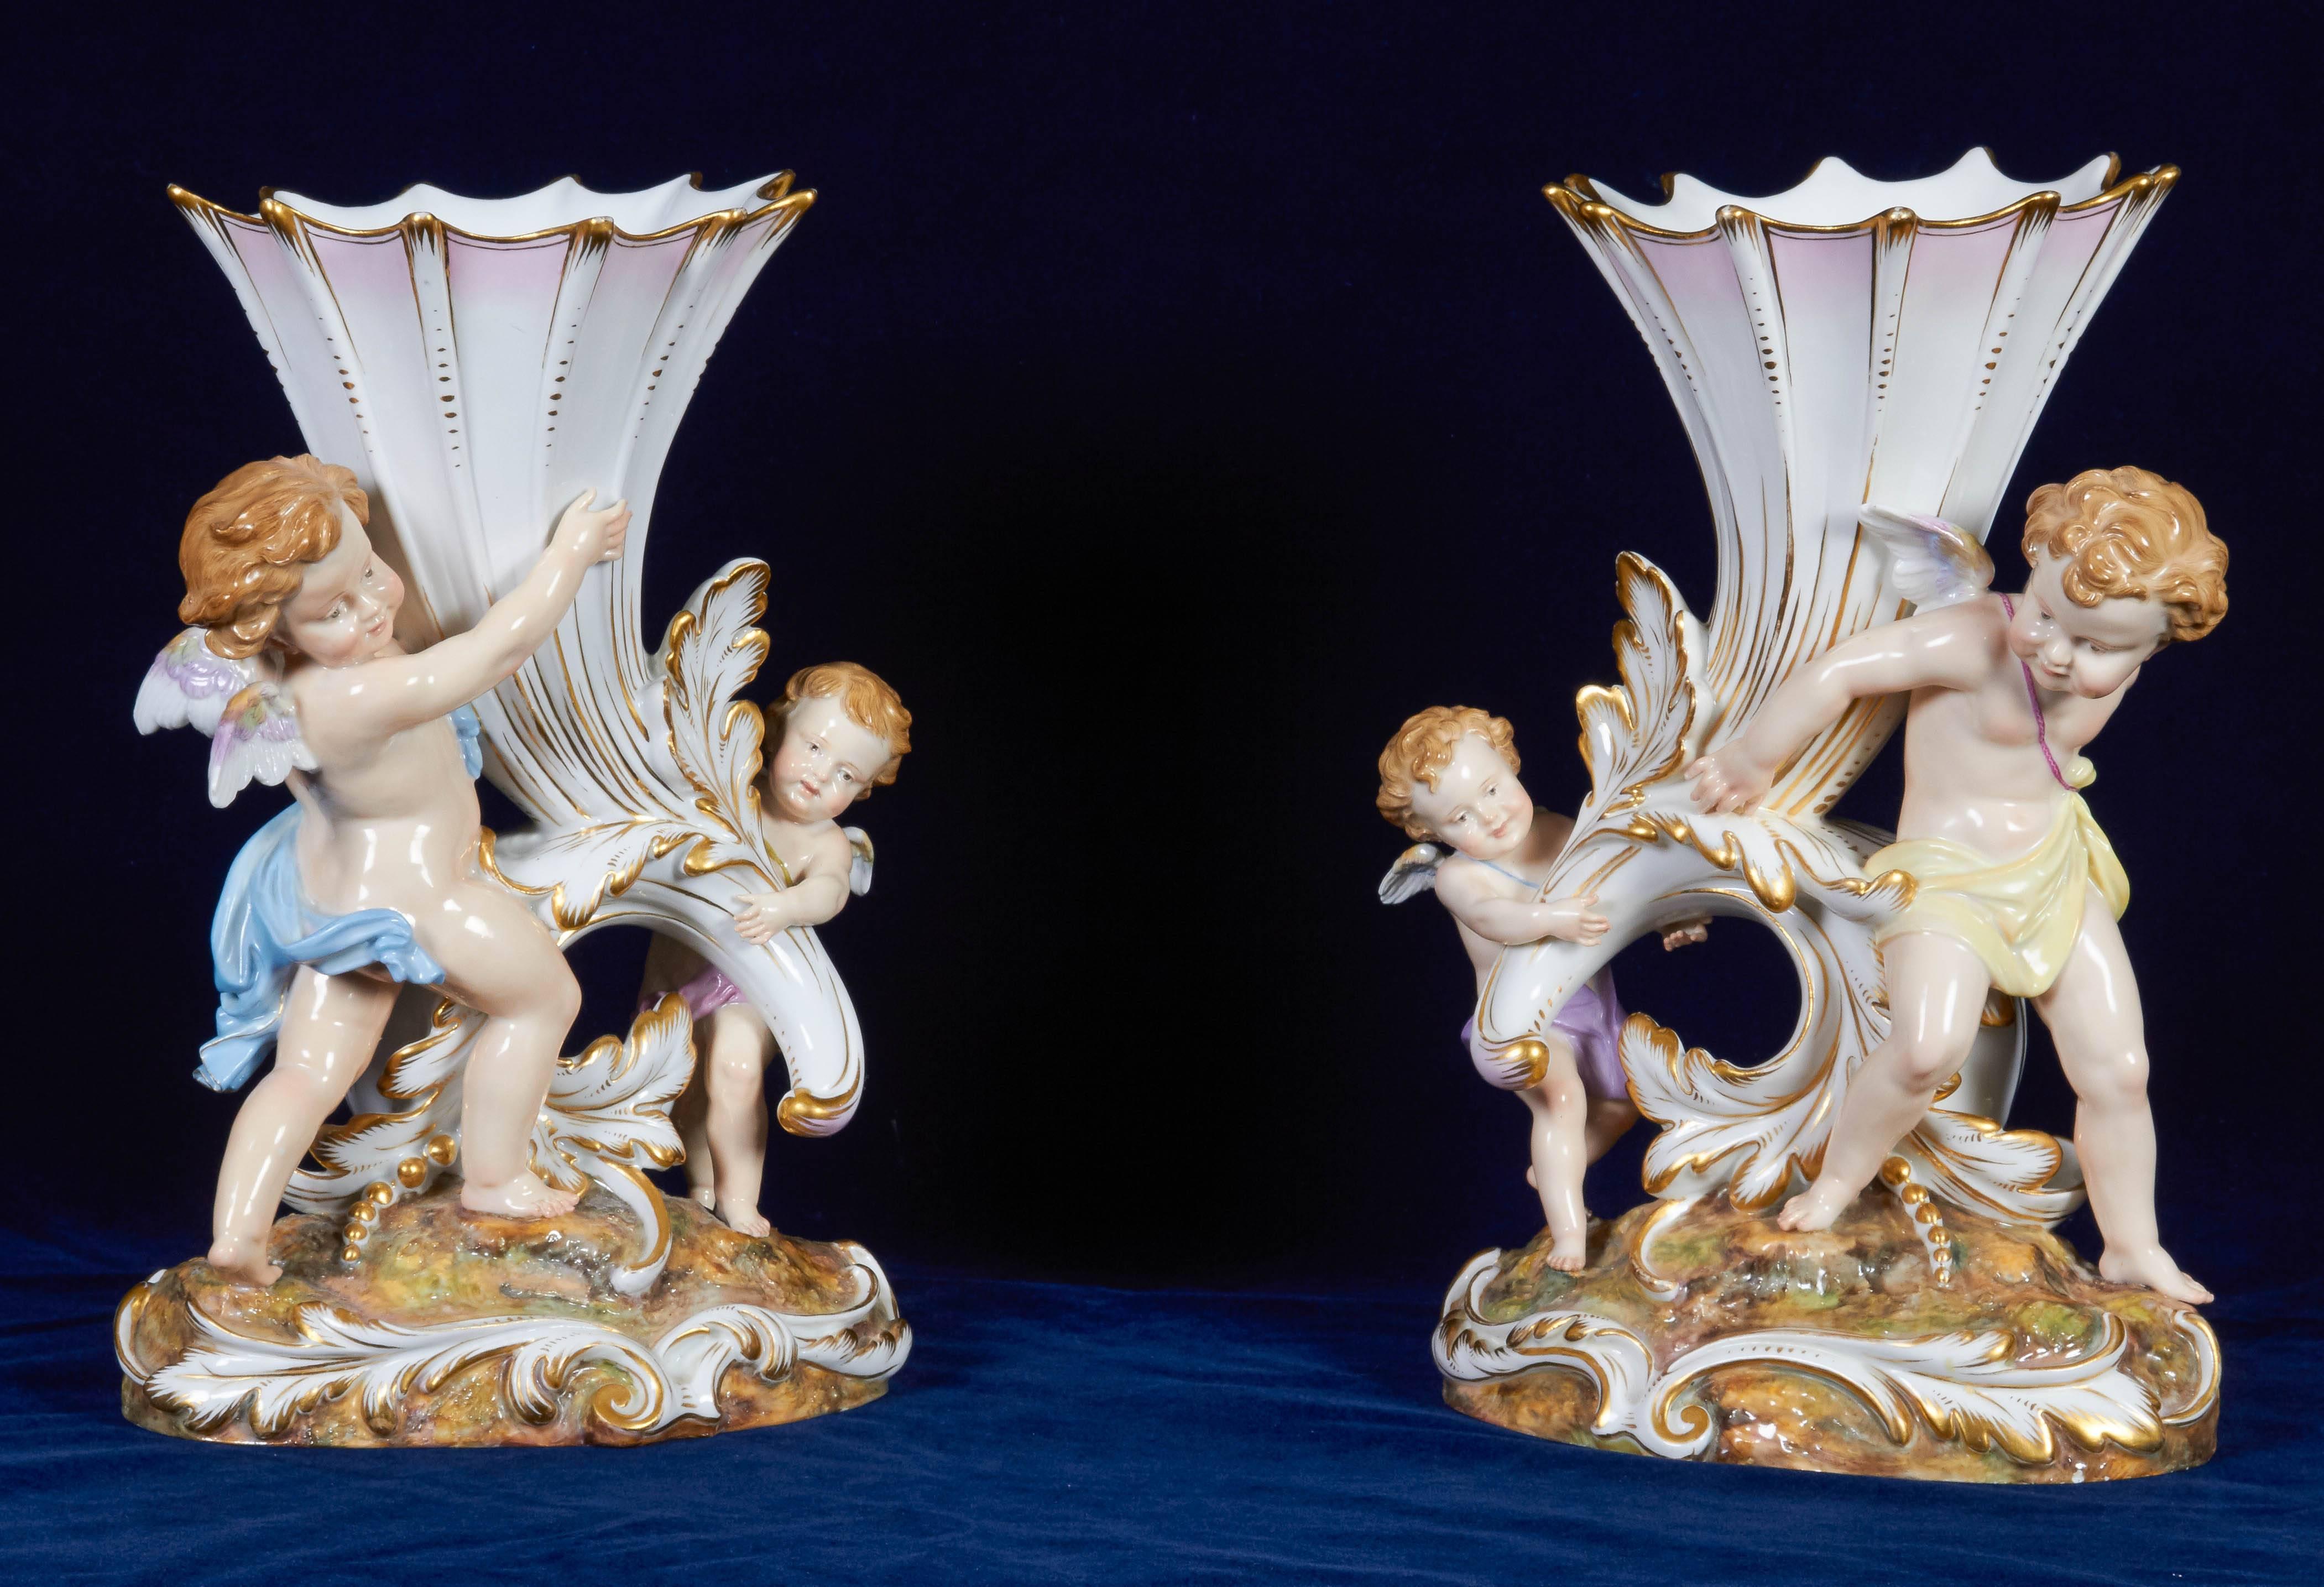 A fine and quite unusual pair of large antique Meissen porcelain groupings, with each cornucopia carried by two Meissen children / cupids, all in different positions. Finely decorated with the best enamel colors of Meissen, in the second half of the